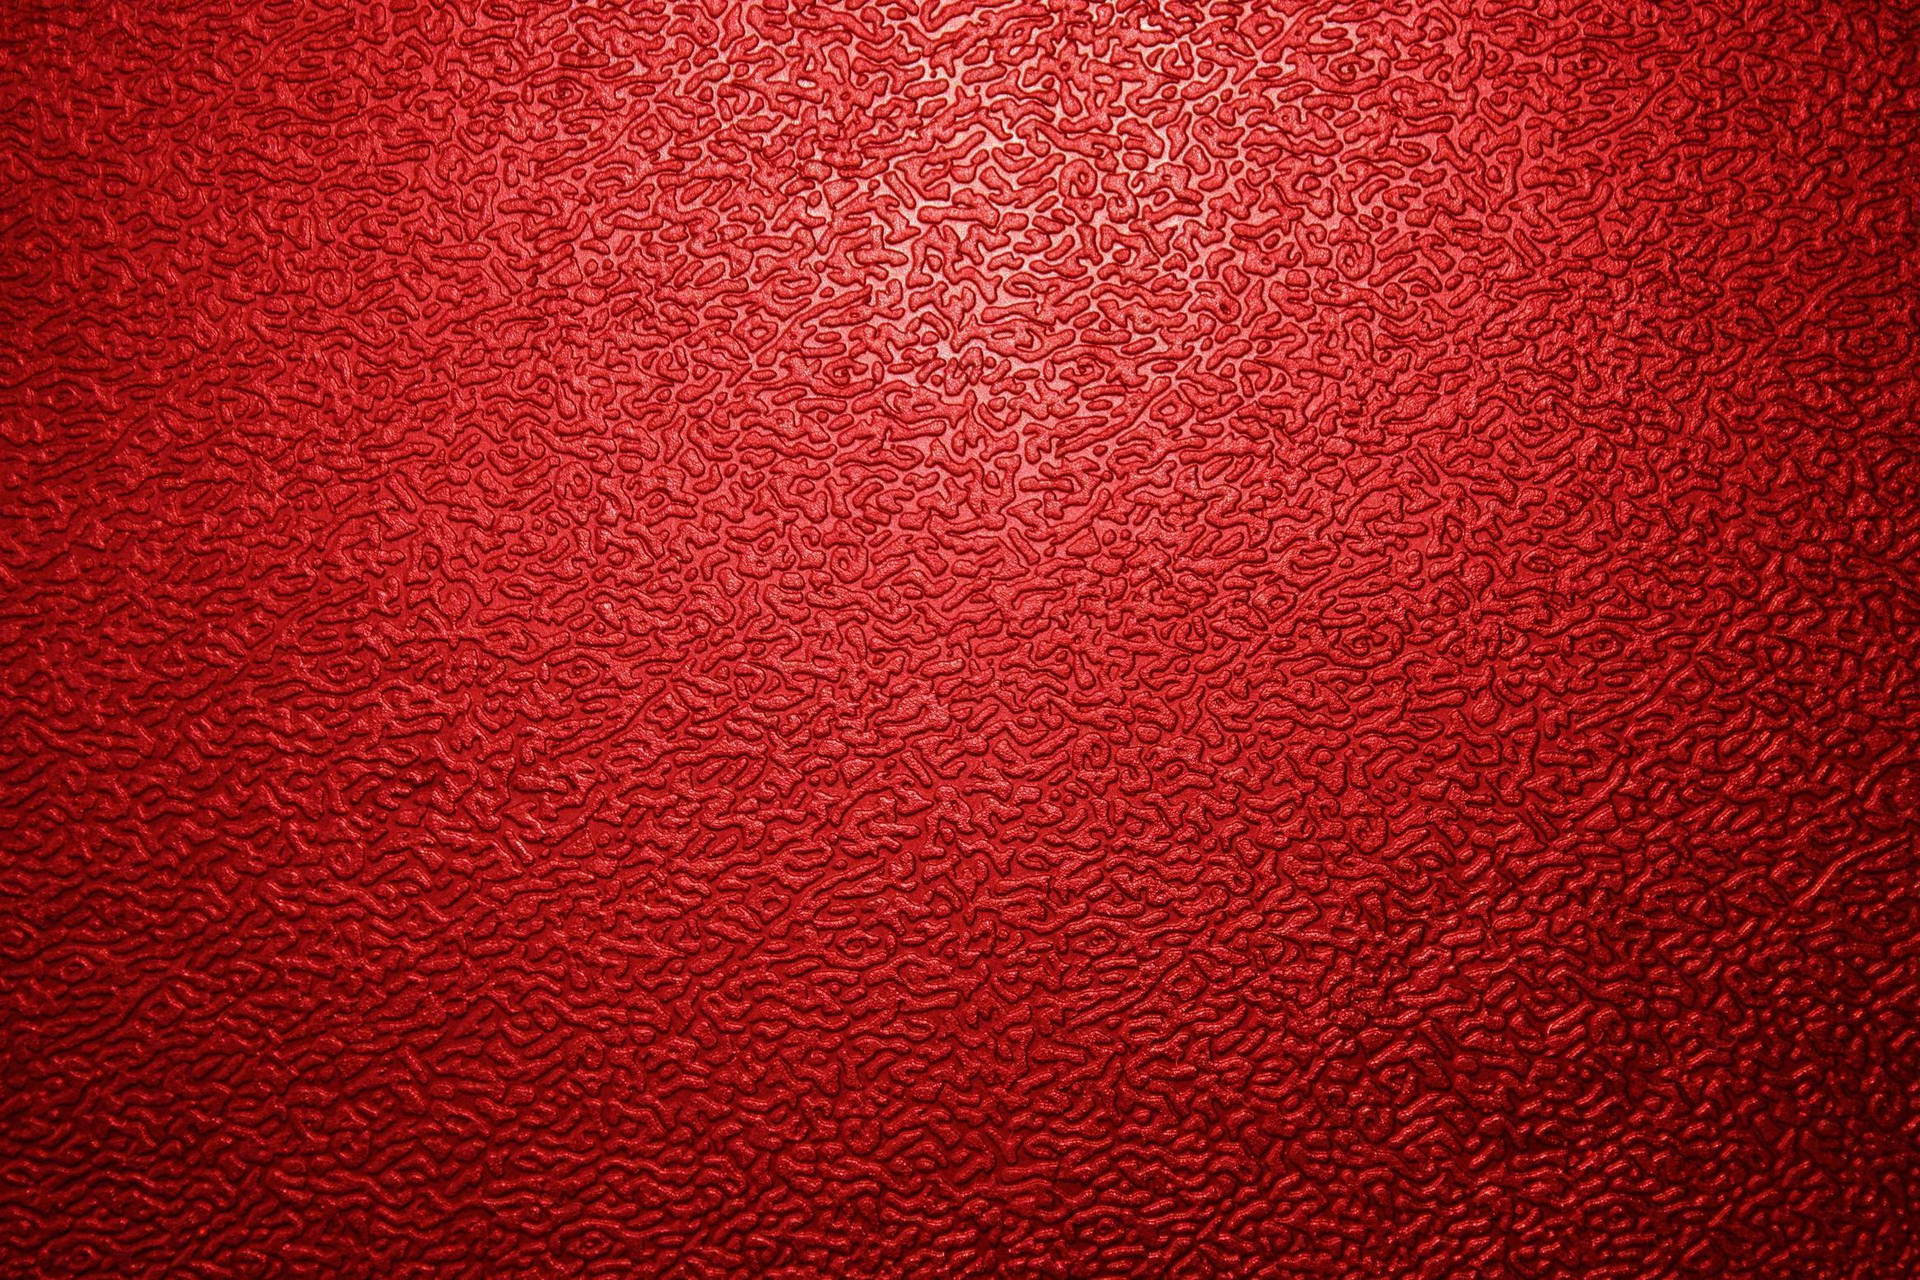 Red 2333X1555 Wallpaper and Background Image